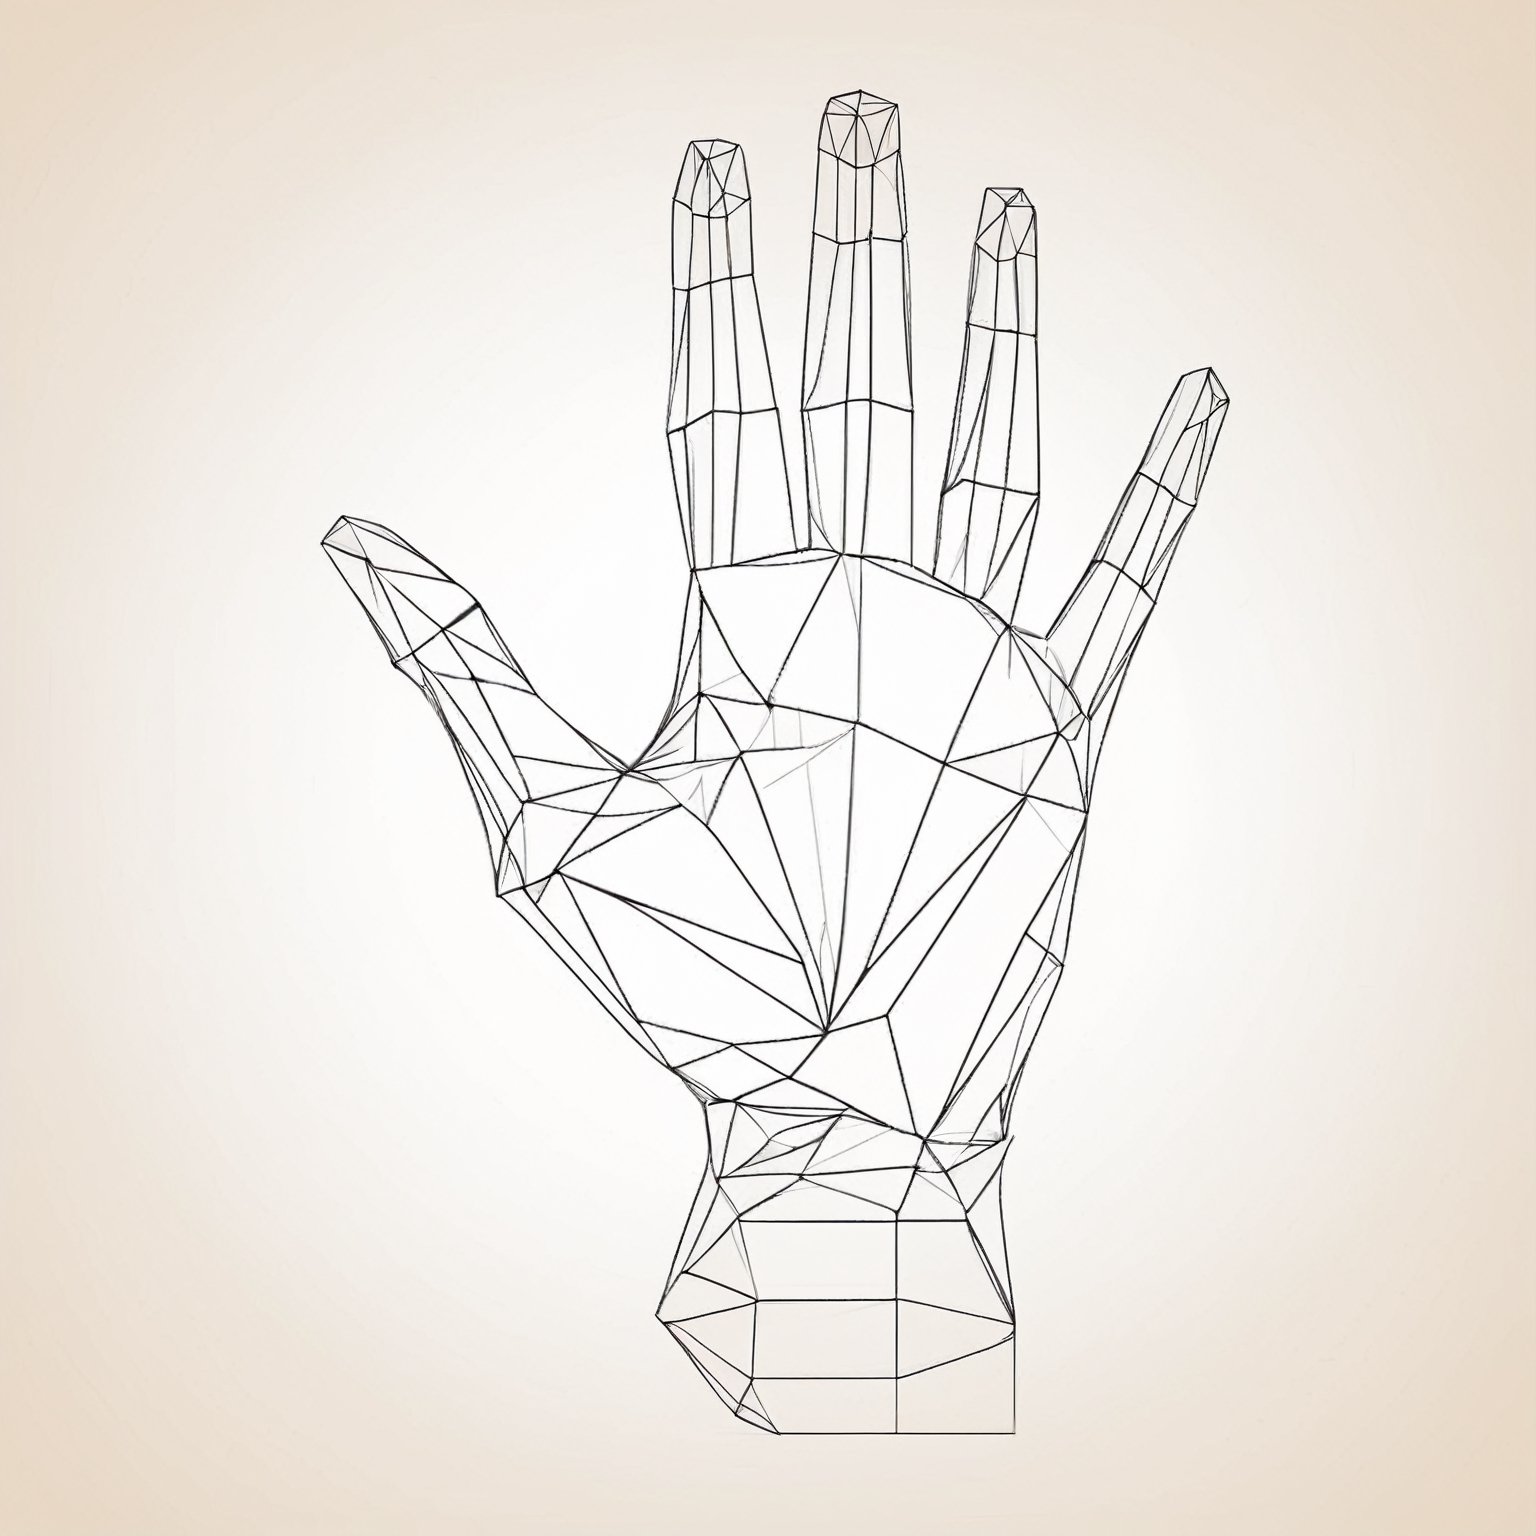 HUMAN PALM OR WRIST. ISOLATED BLACK VECTOR ILLUSTRATION IN LOW-POLY STYLE ON A WHITE BACKGROUND. THE DRAWING OF HAND CONSISTS OF THIN LINES AND DOTS. POLYGONAL IMAGE ON TOPIC OF ANATOMY. LOW POLY EPS